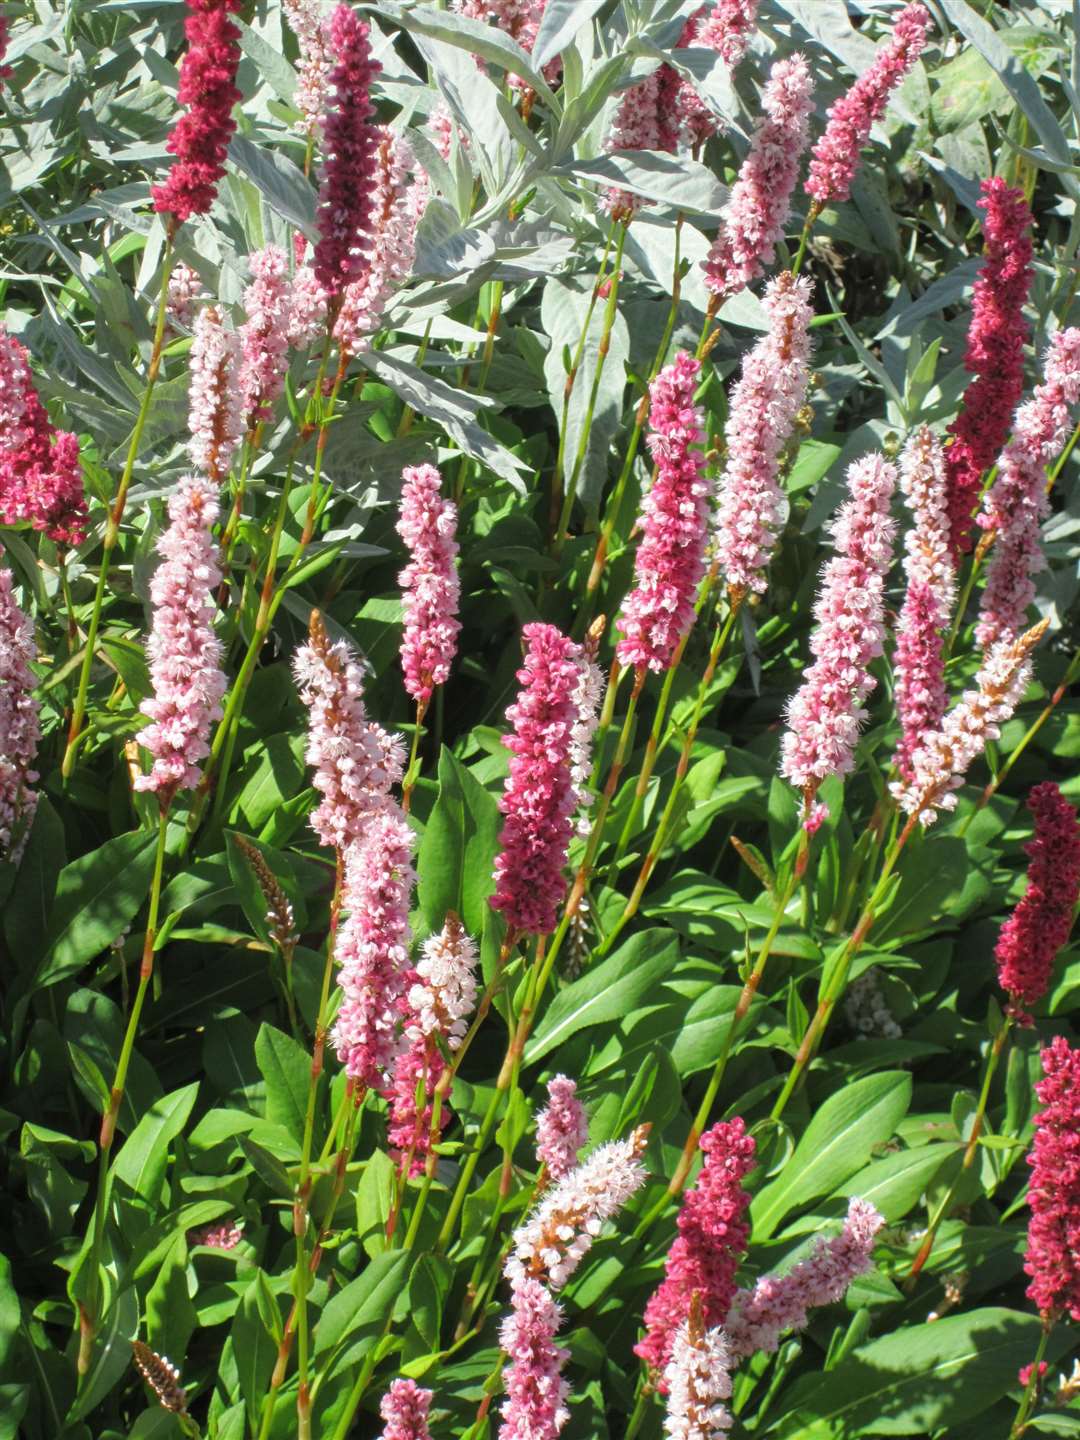 Other quick-growing varieties include Persicaria affinis, which thrives in sun or light shade. Picture: iStock/PA